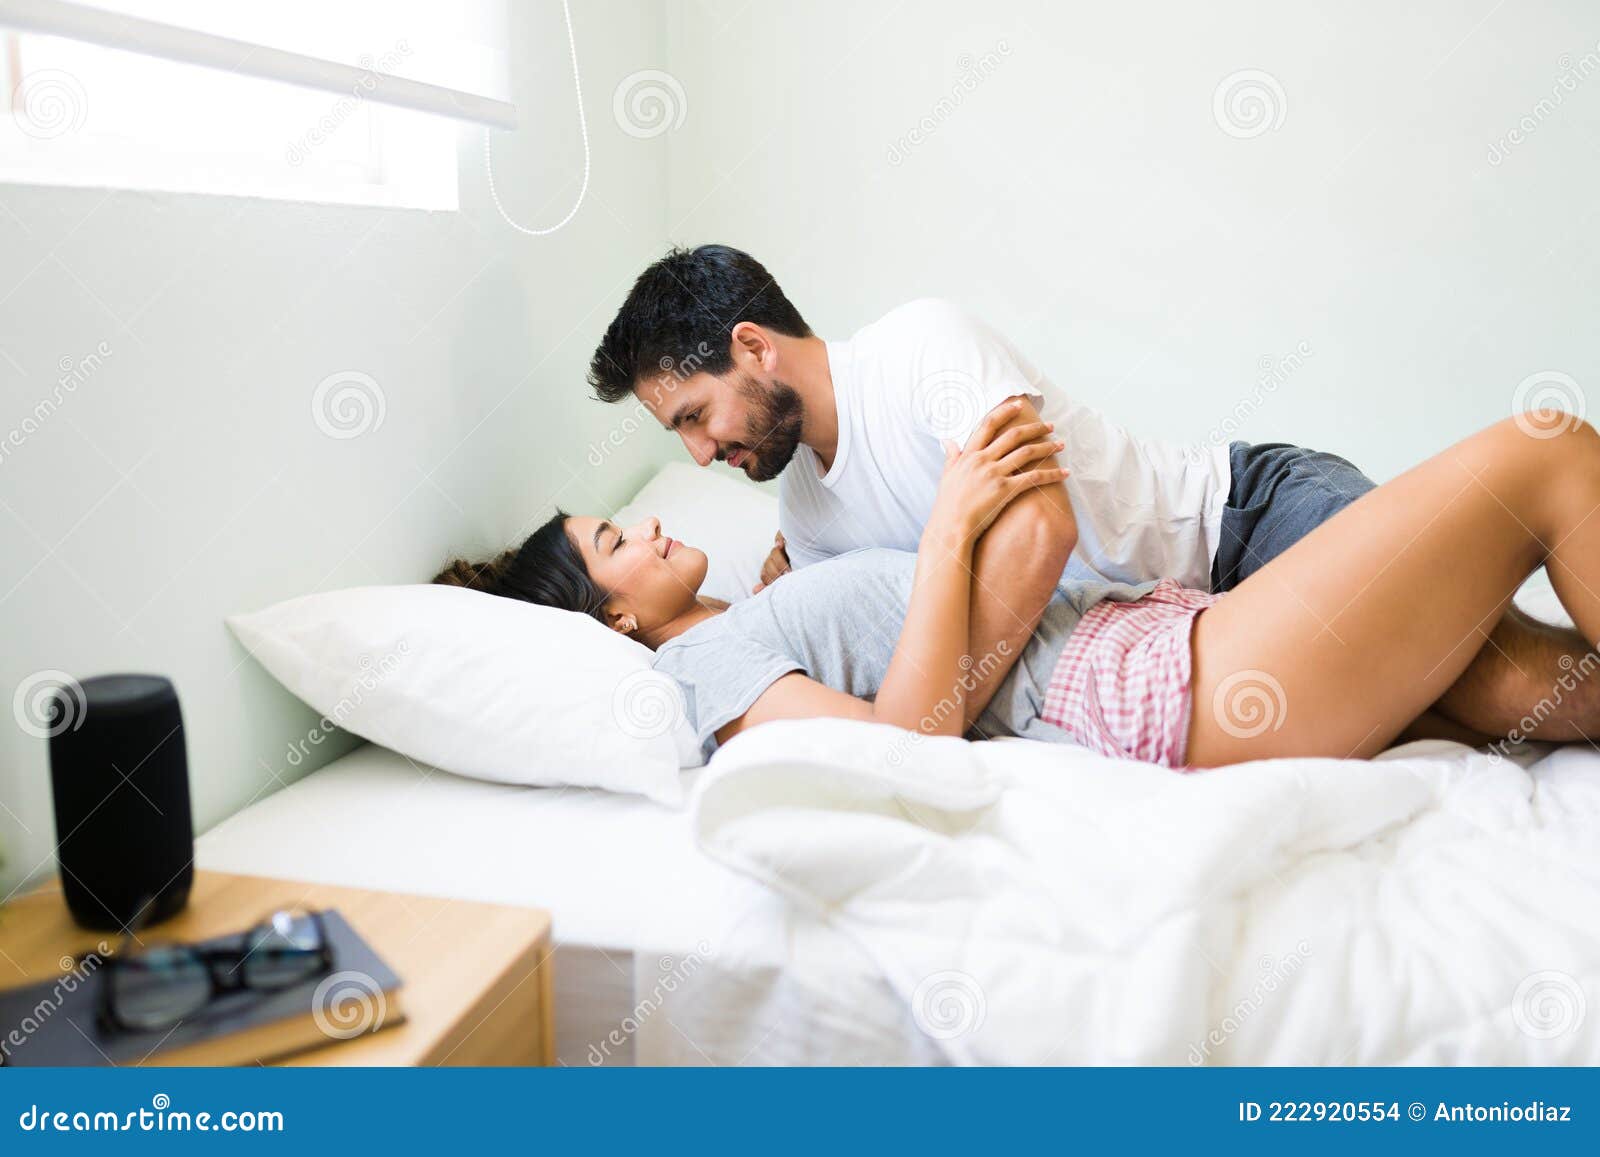 Seductive Boyfriend Smiling To His Girlfriend in Bed Stock Photo